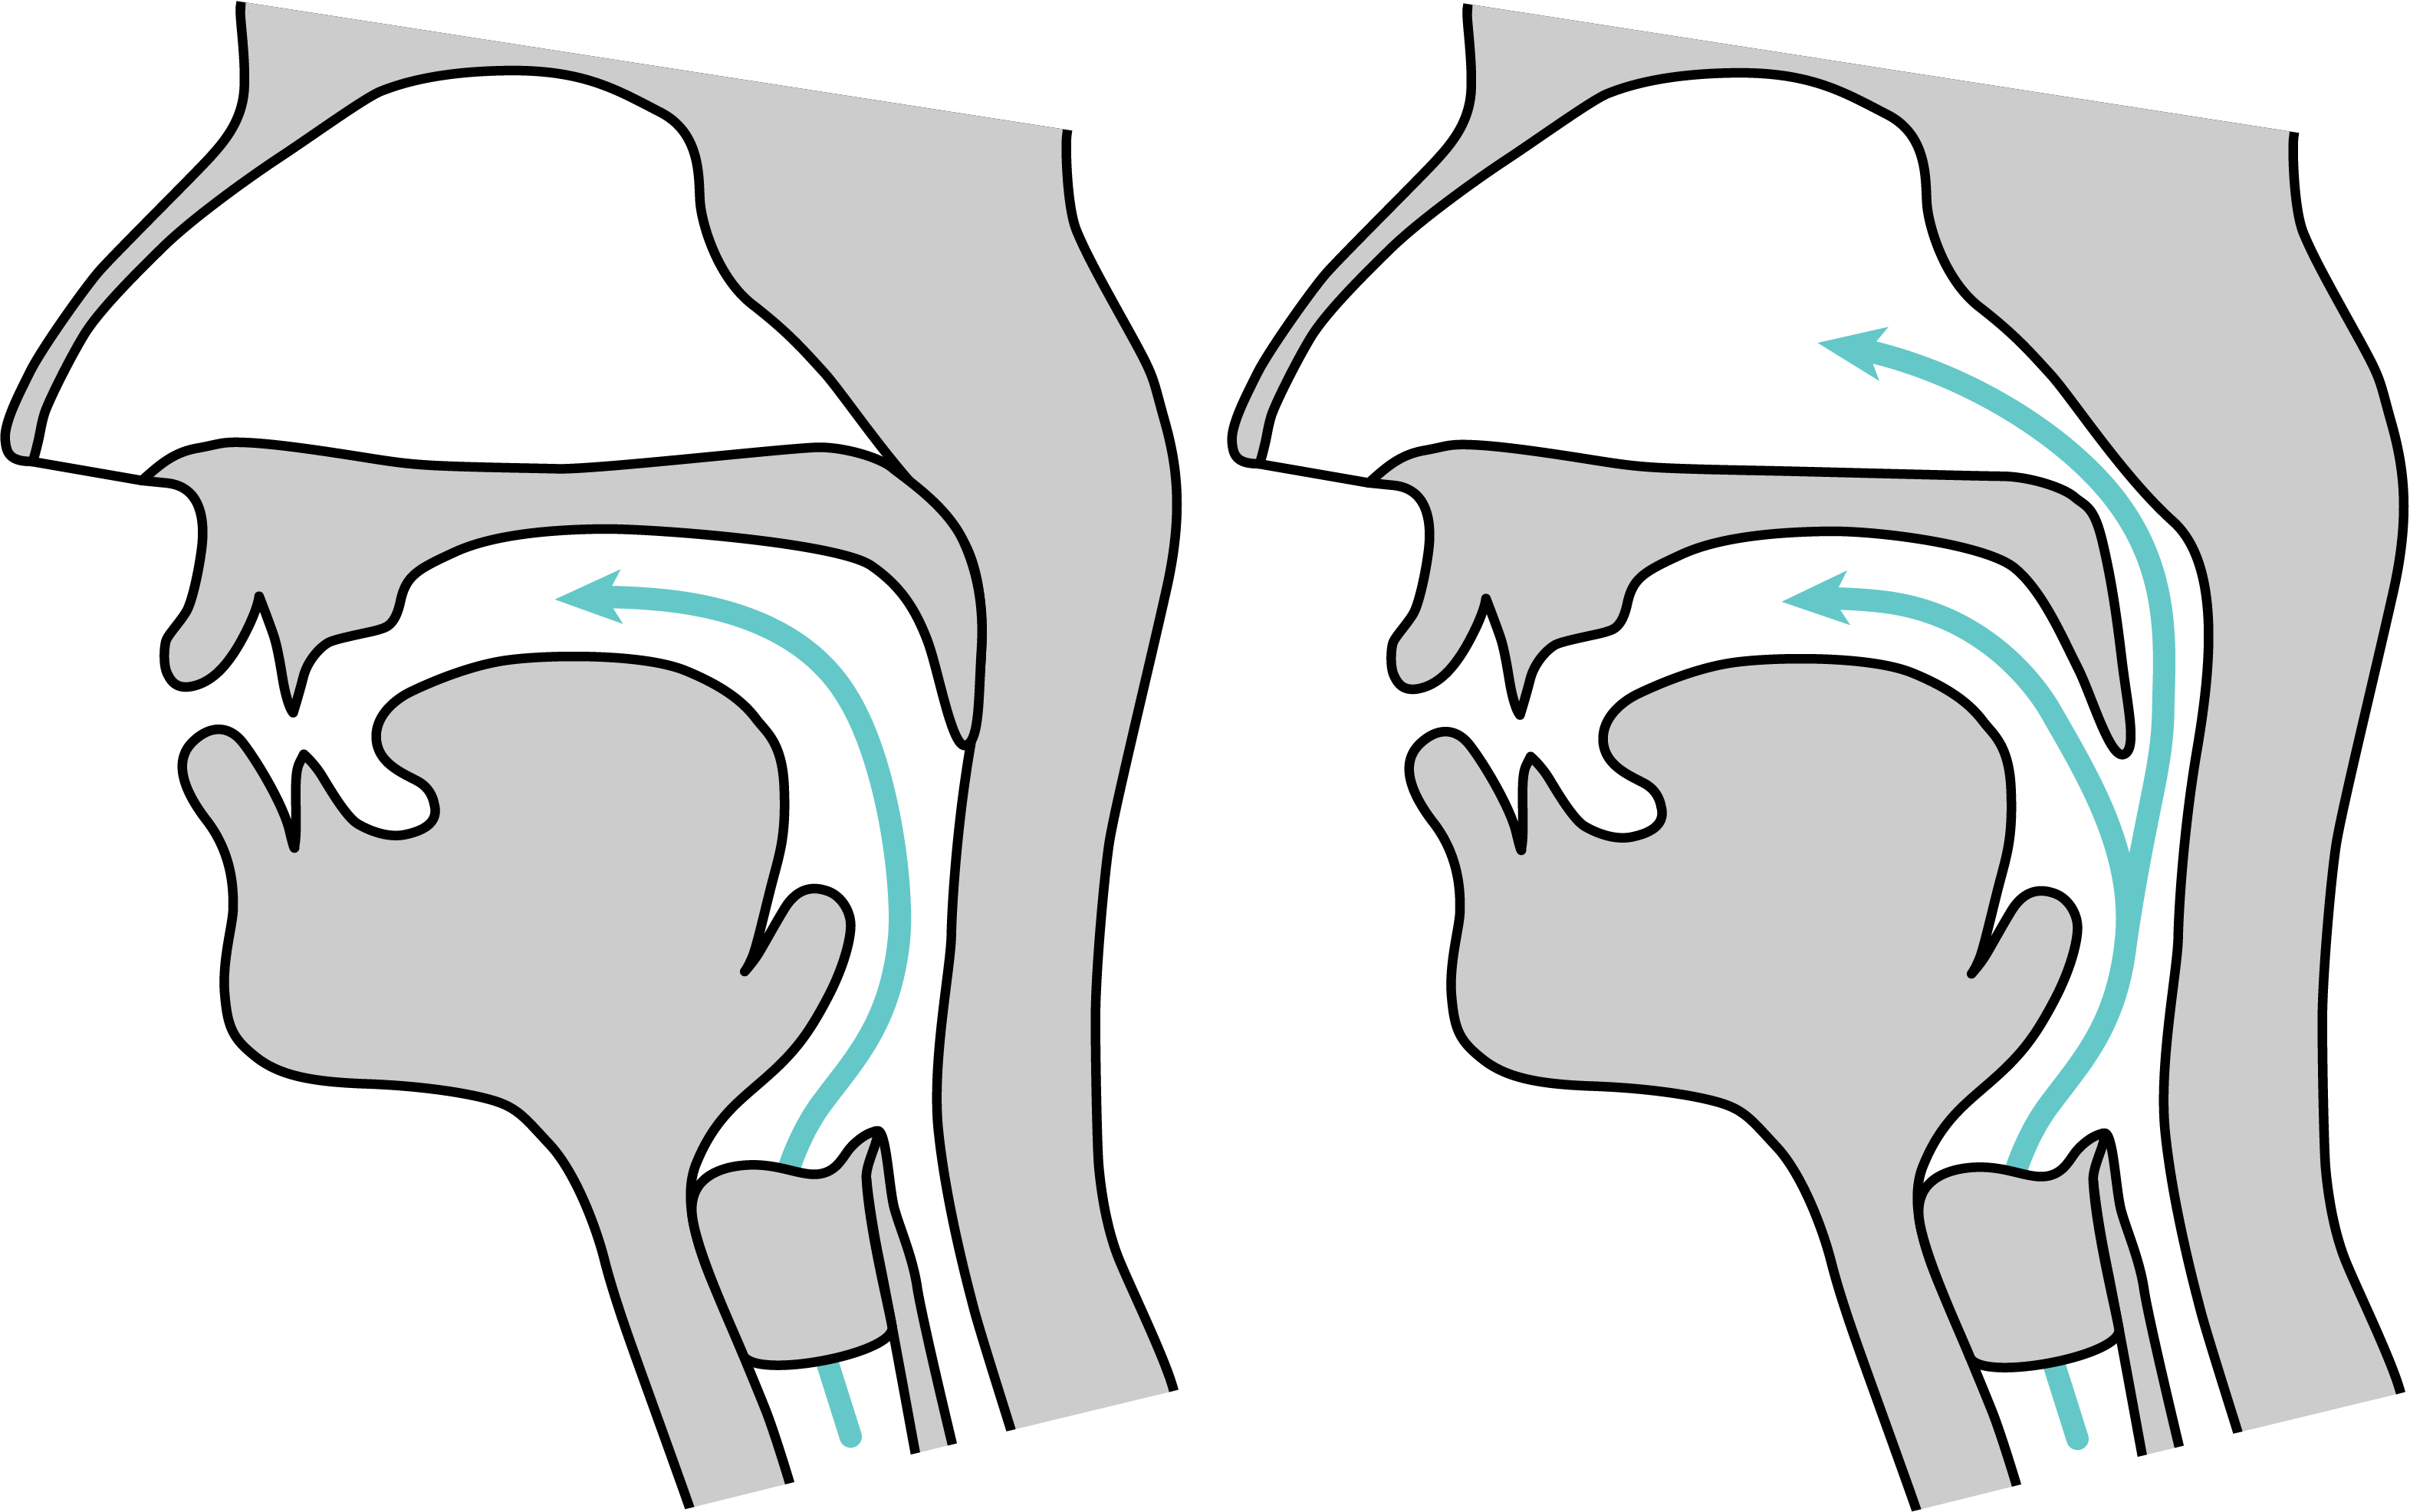 Two midsagittal diagrams, showing oral only airflow due to a raised velum (left) and simultaneous oral and nasal airflow due to a lowered velum (right).